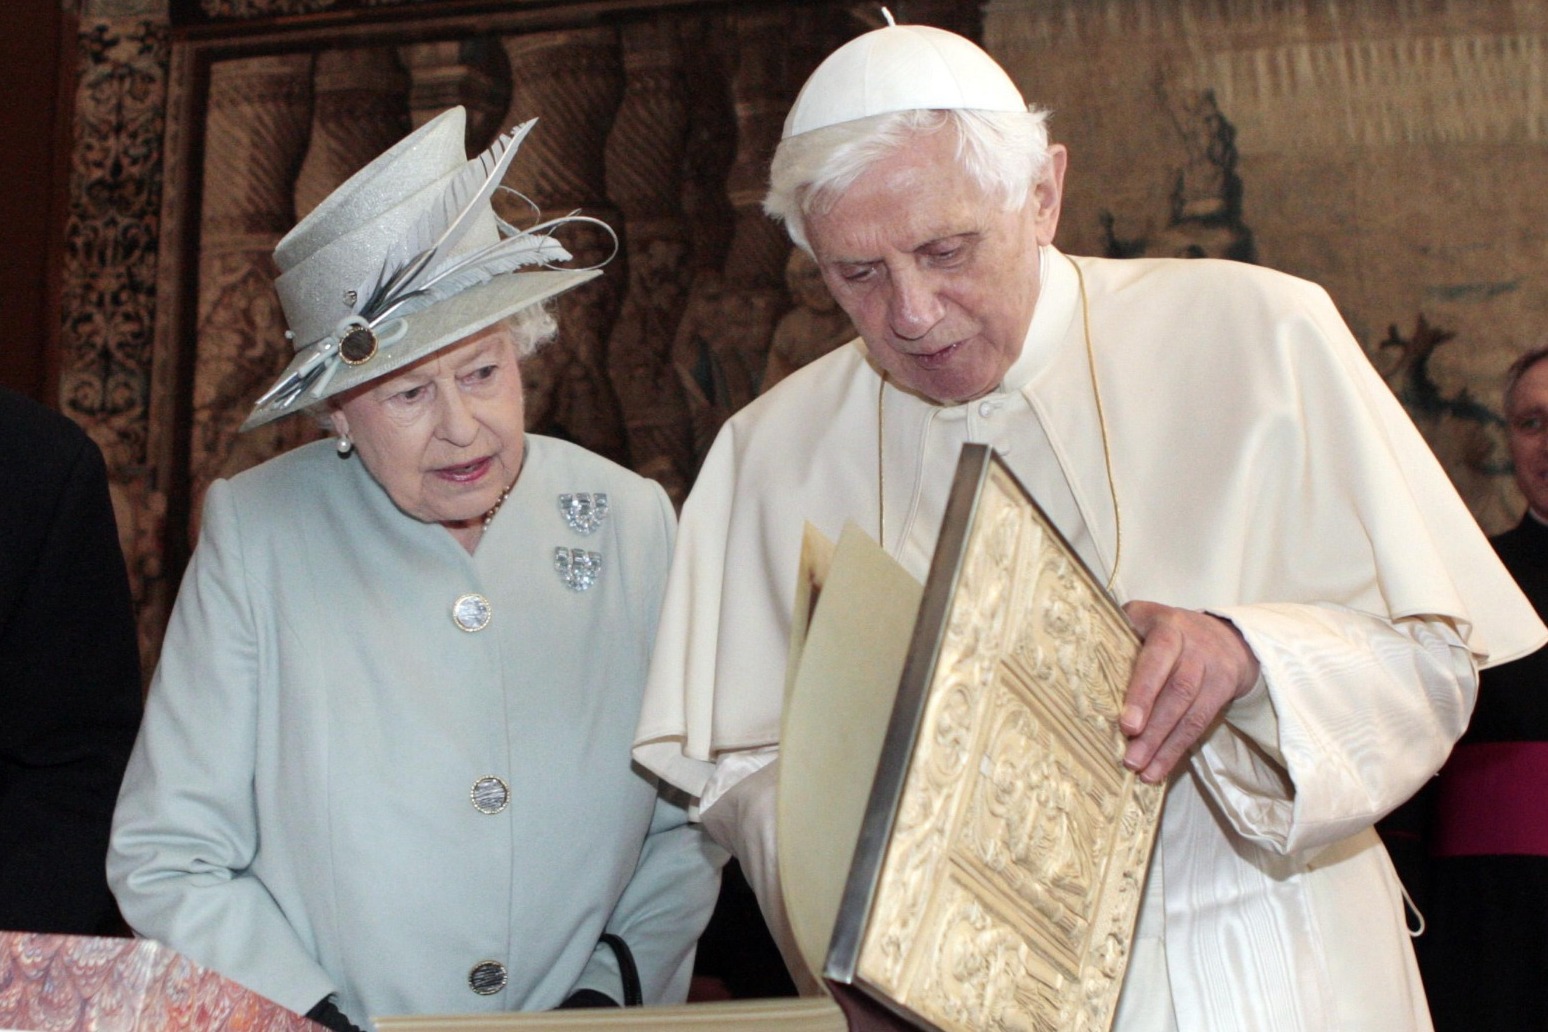 Tributes paid to ‘great theologian’ Pope Emeritus Benedict XVI after his death 